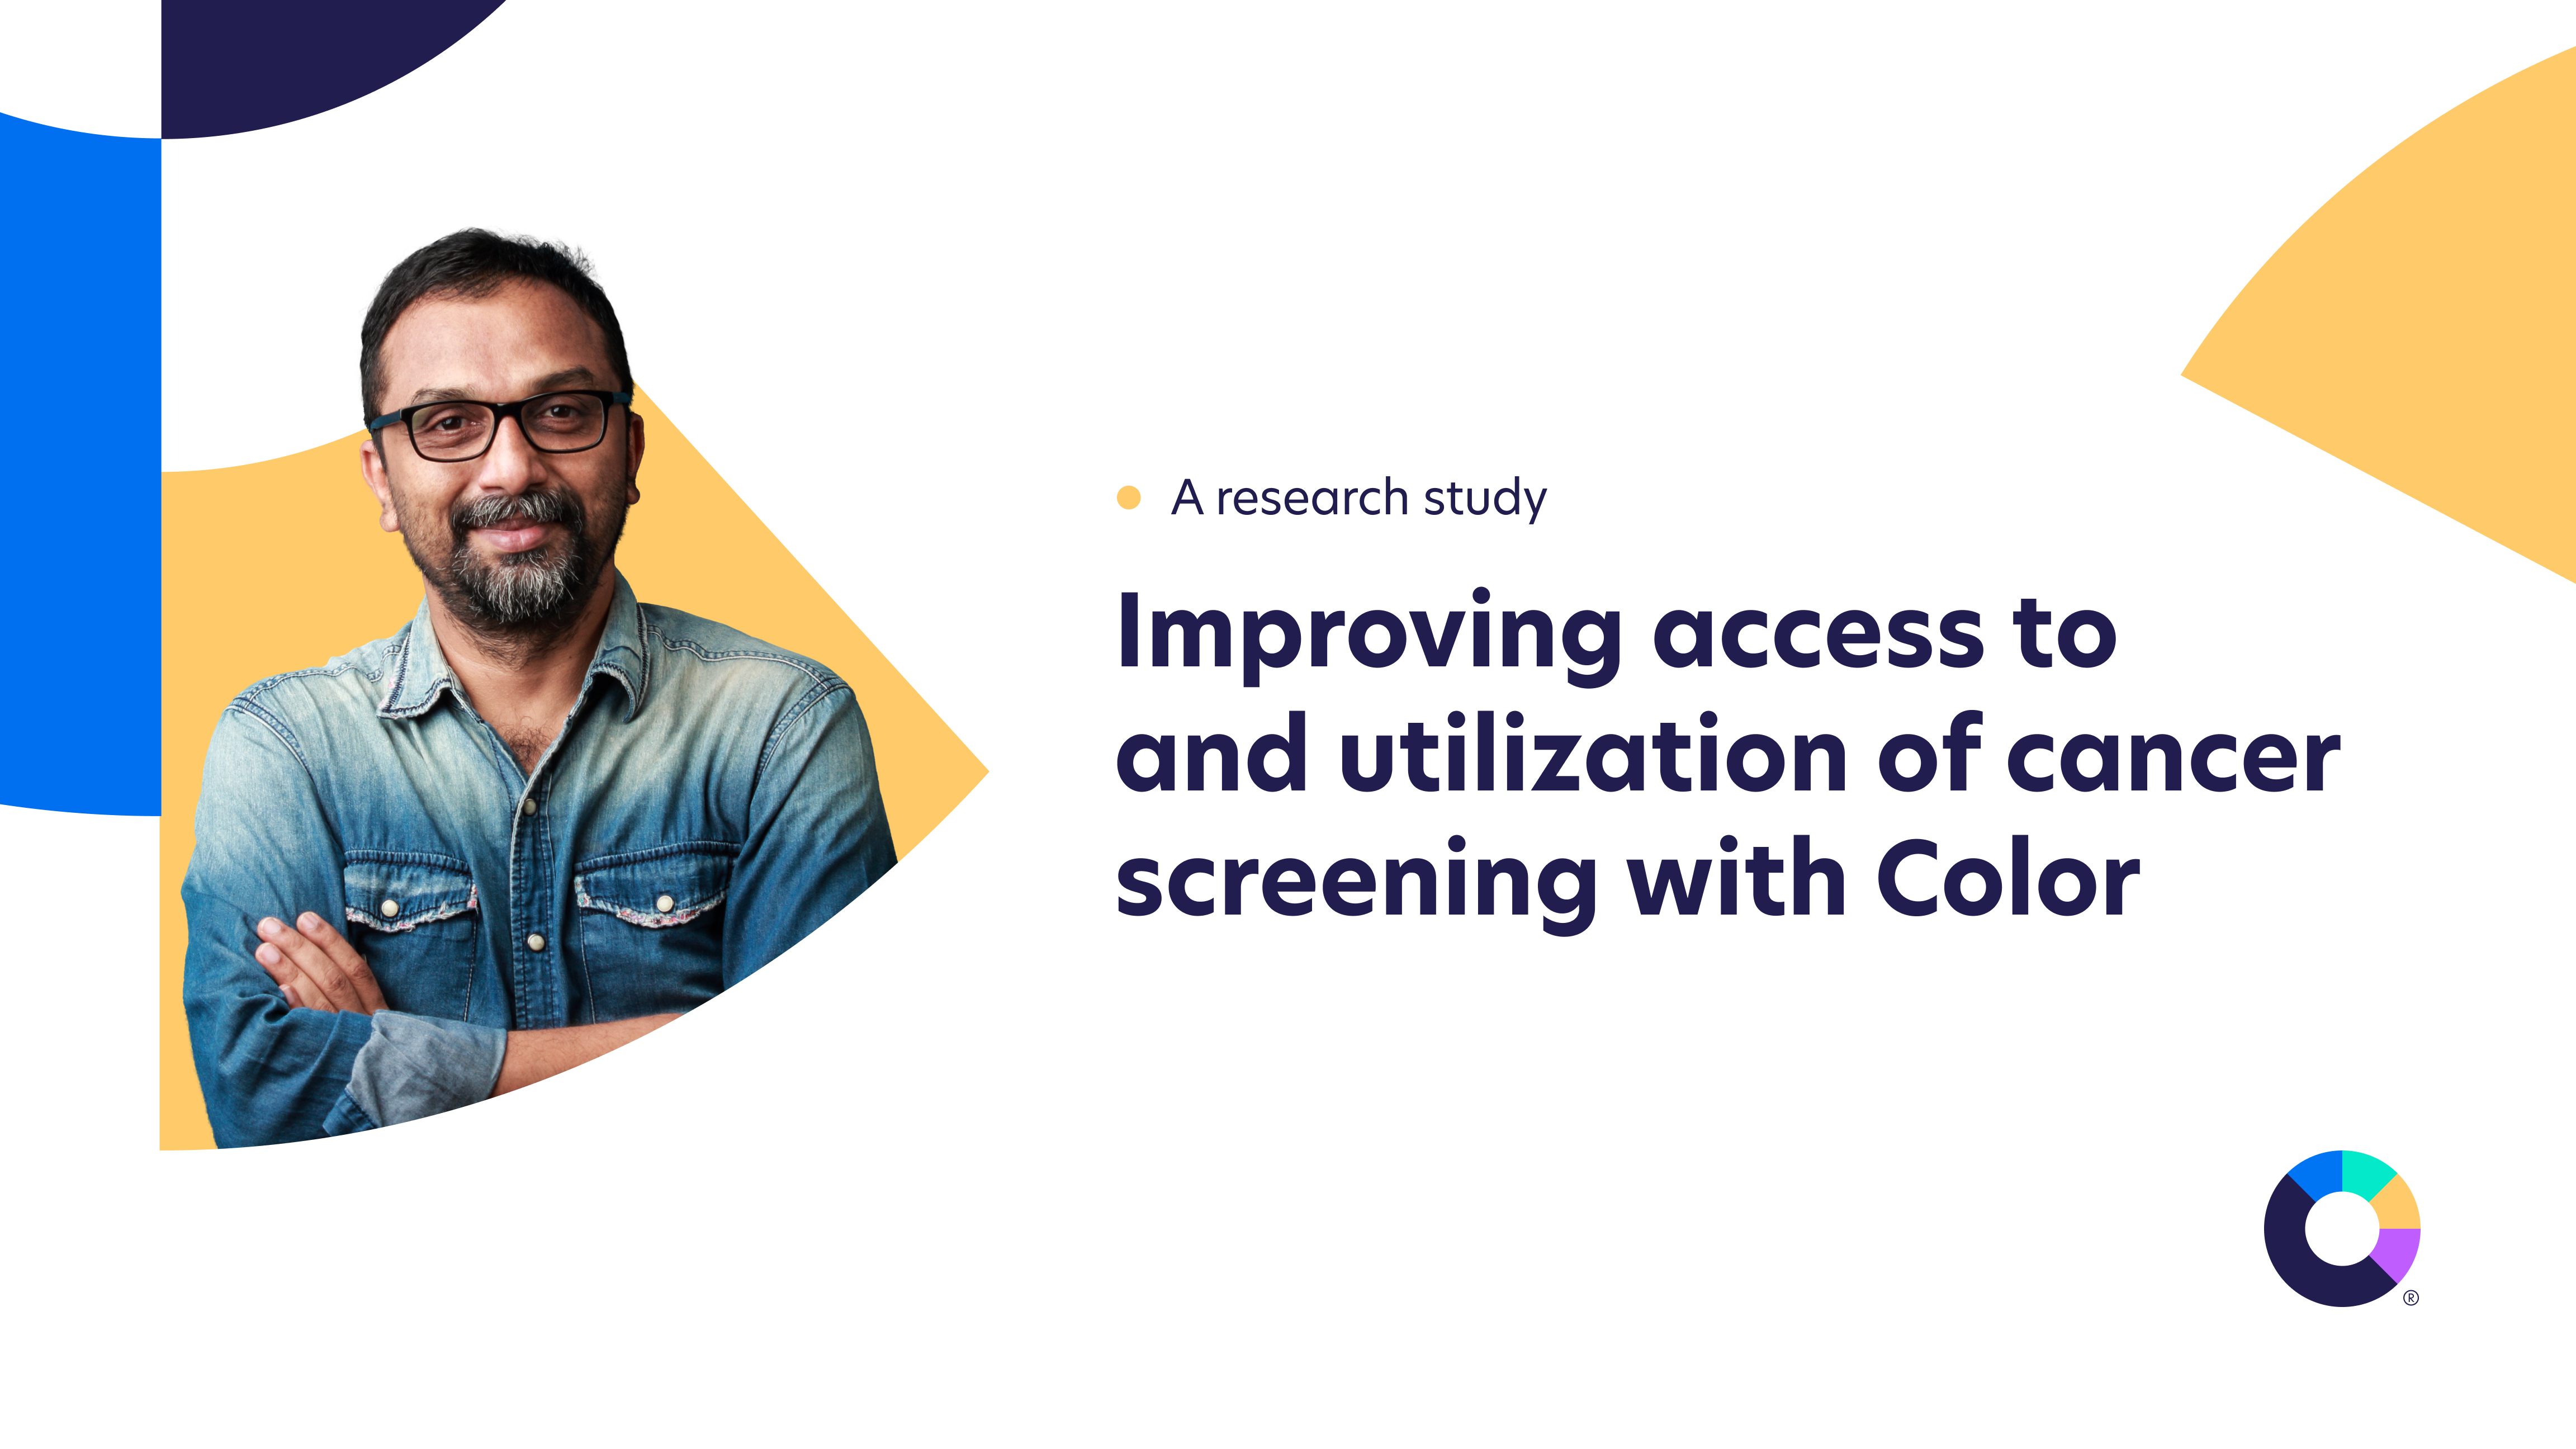 Improving access to and utilization of cancer screening with Color: A research study